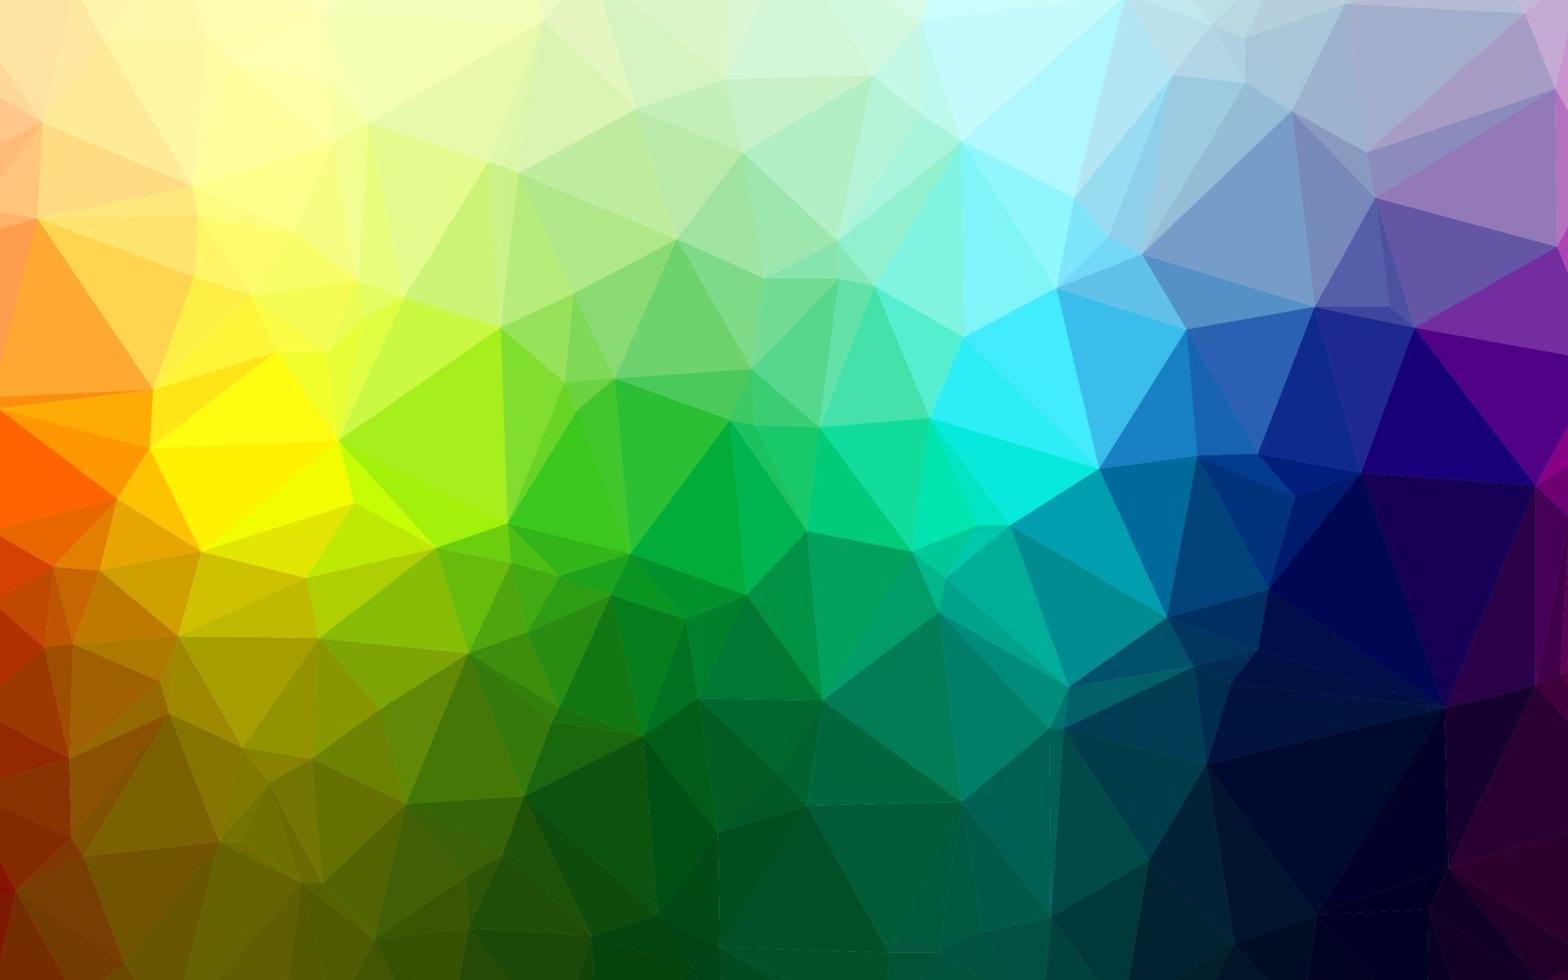 Light Multicolor, Rainbow vector low poly layout.